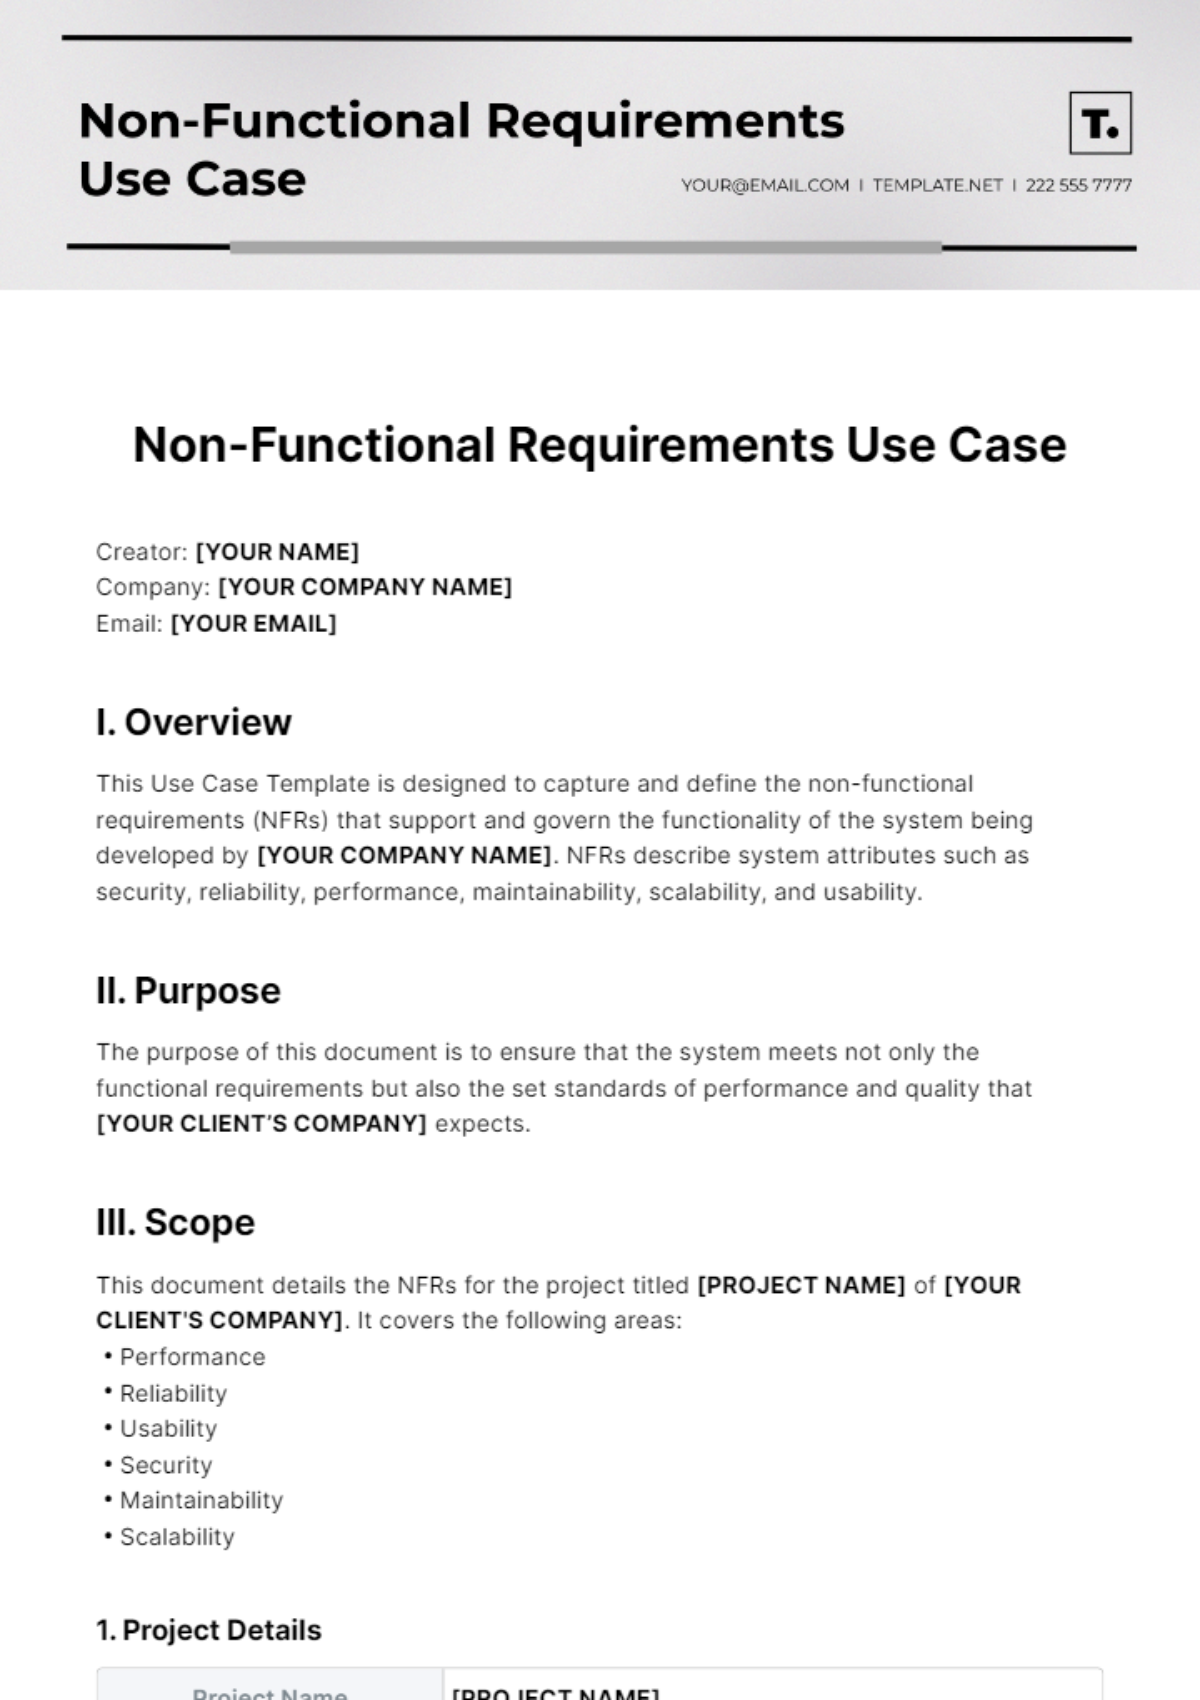 Non-Functional Requirements Use Case Template